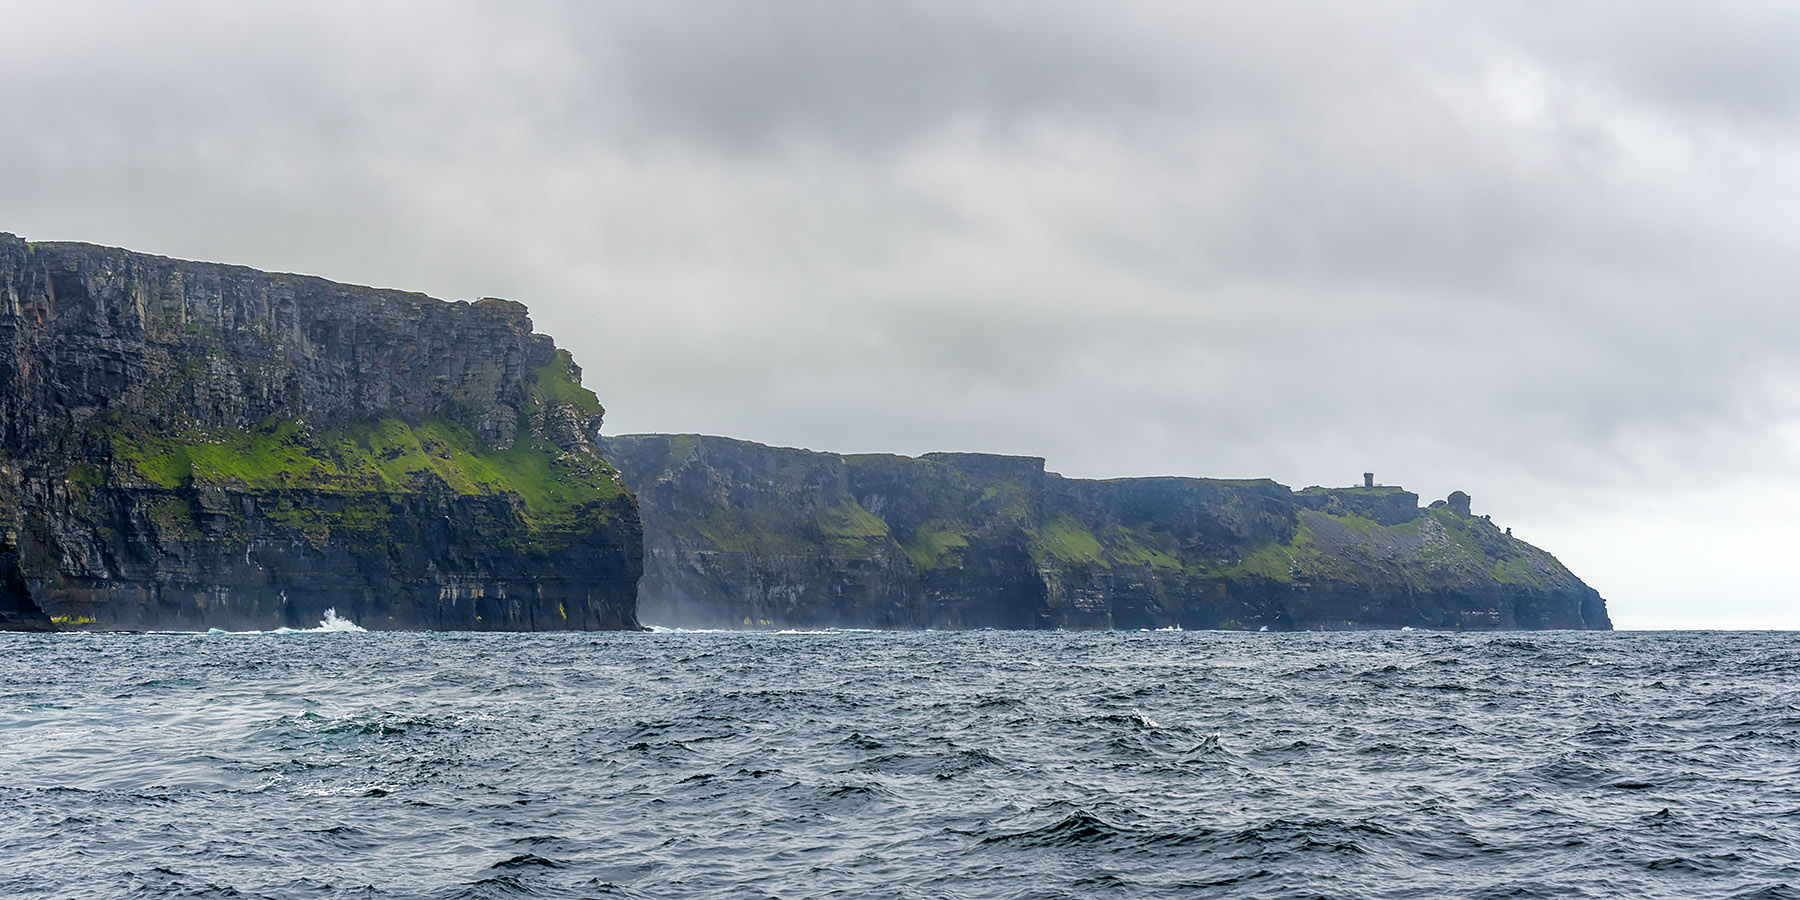 Approaching the Cliffs of Moher